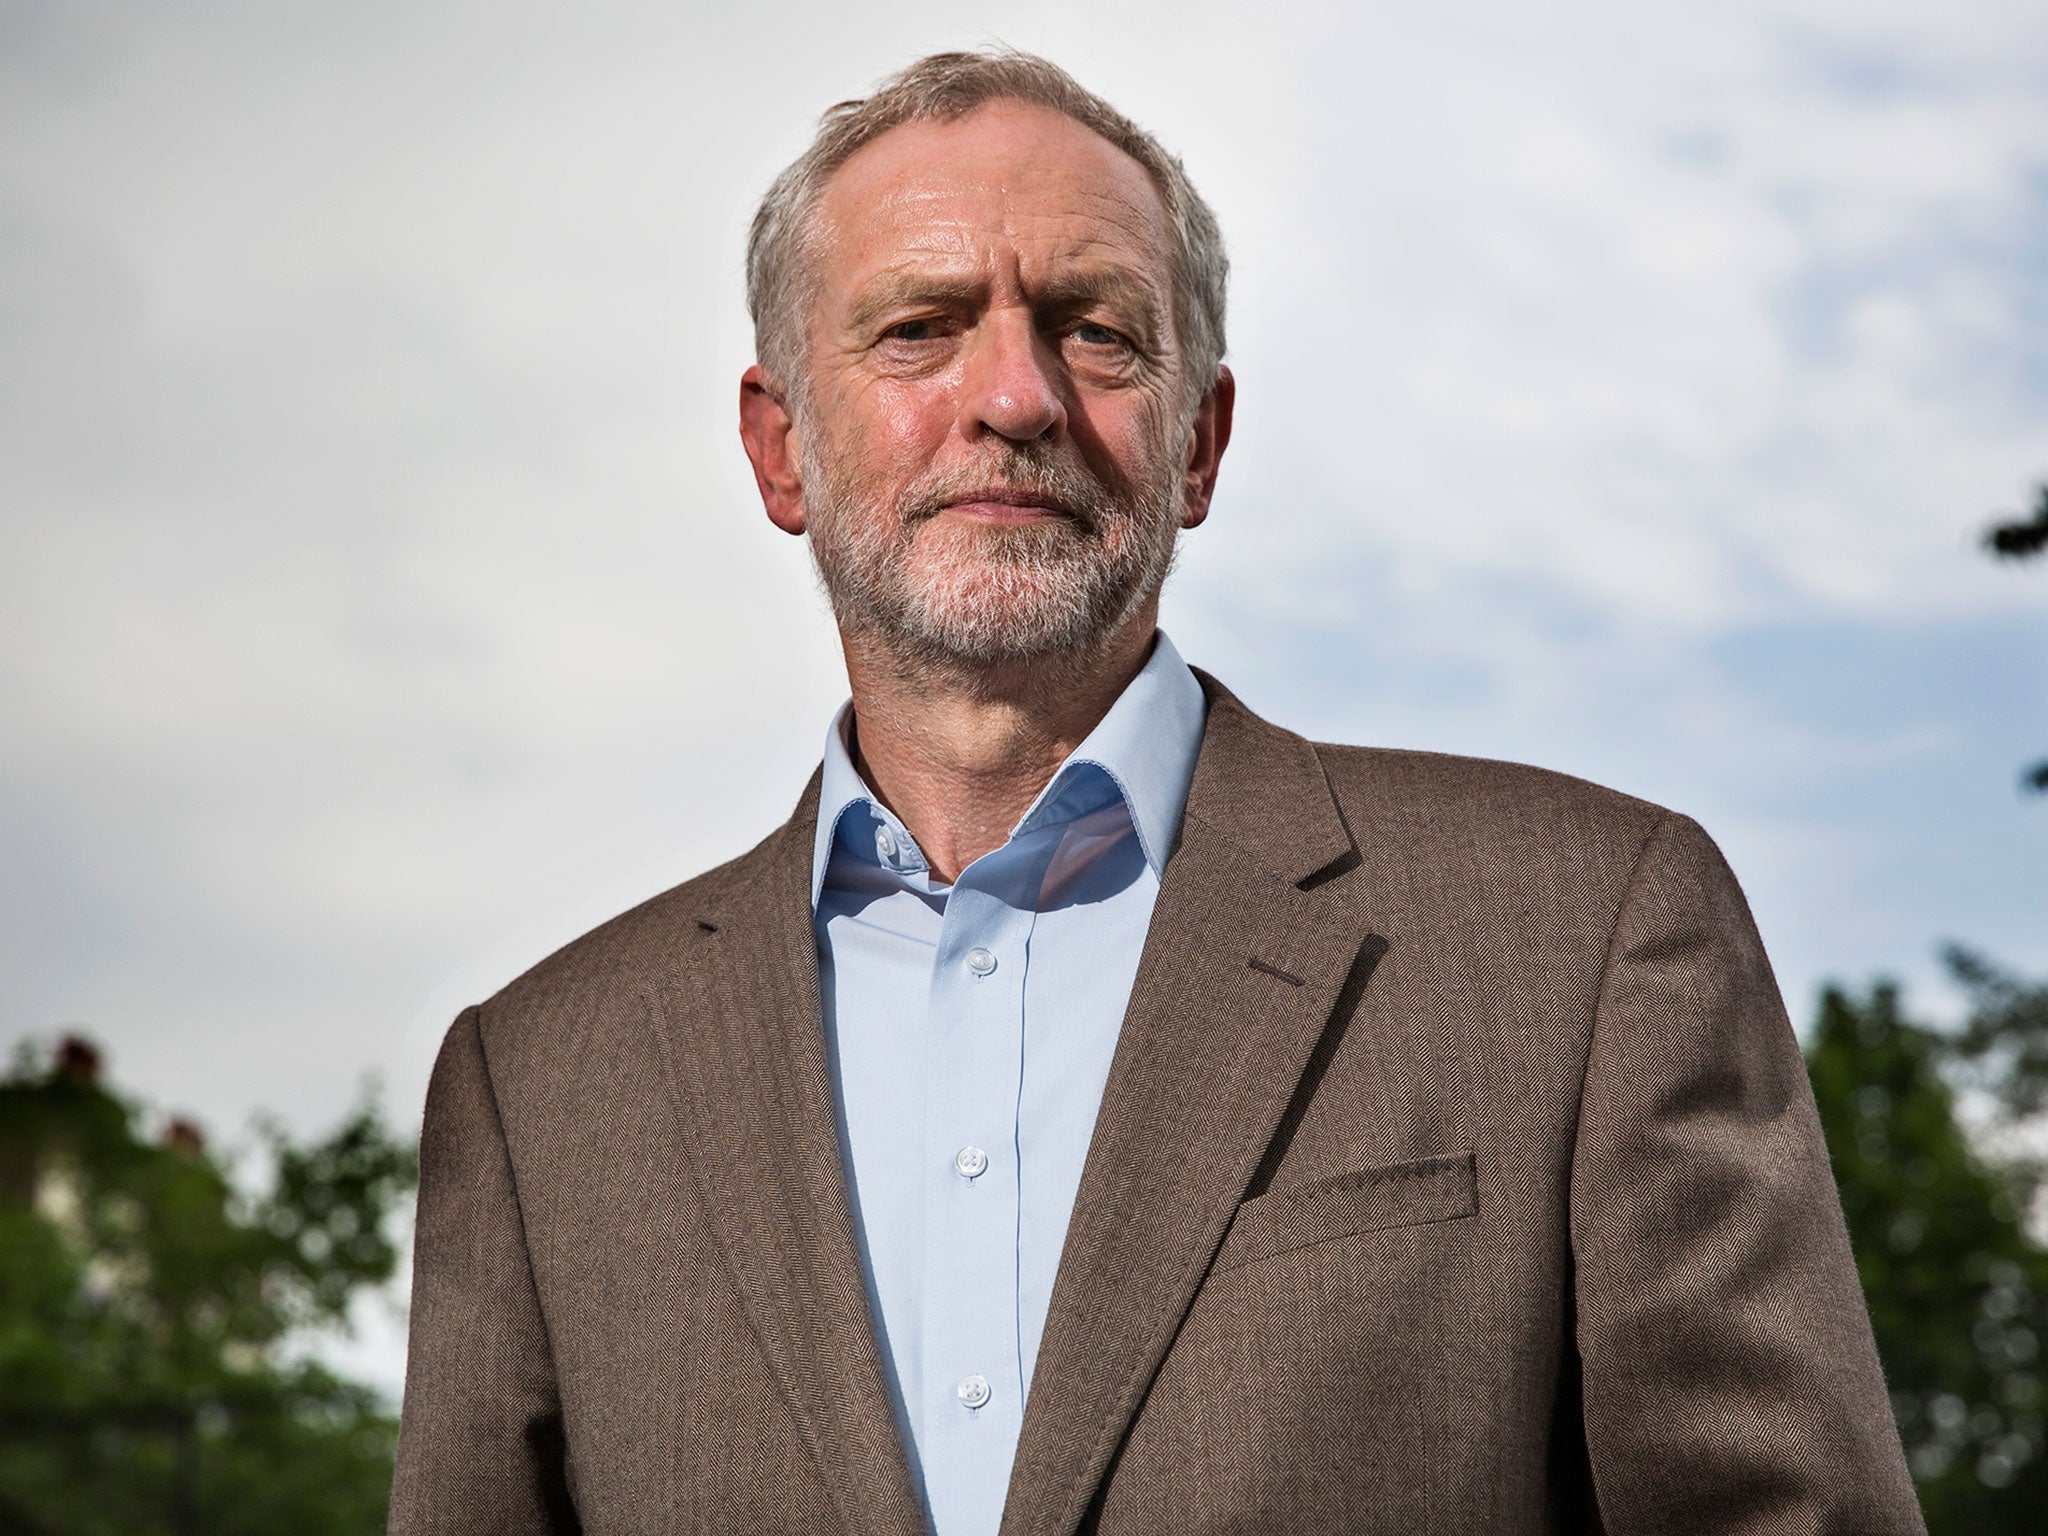 Allegations have surfaced during the election campaign of Mr Corbyn’s backing for individuals and groups associated with Holocaust deniers and anti-Semites